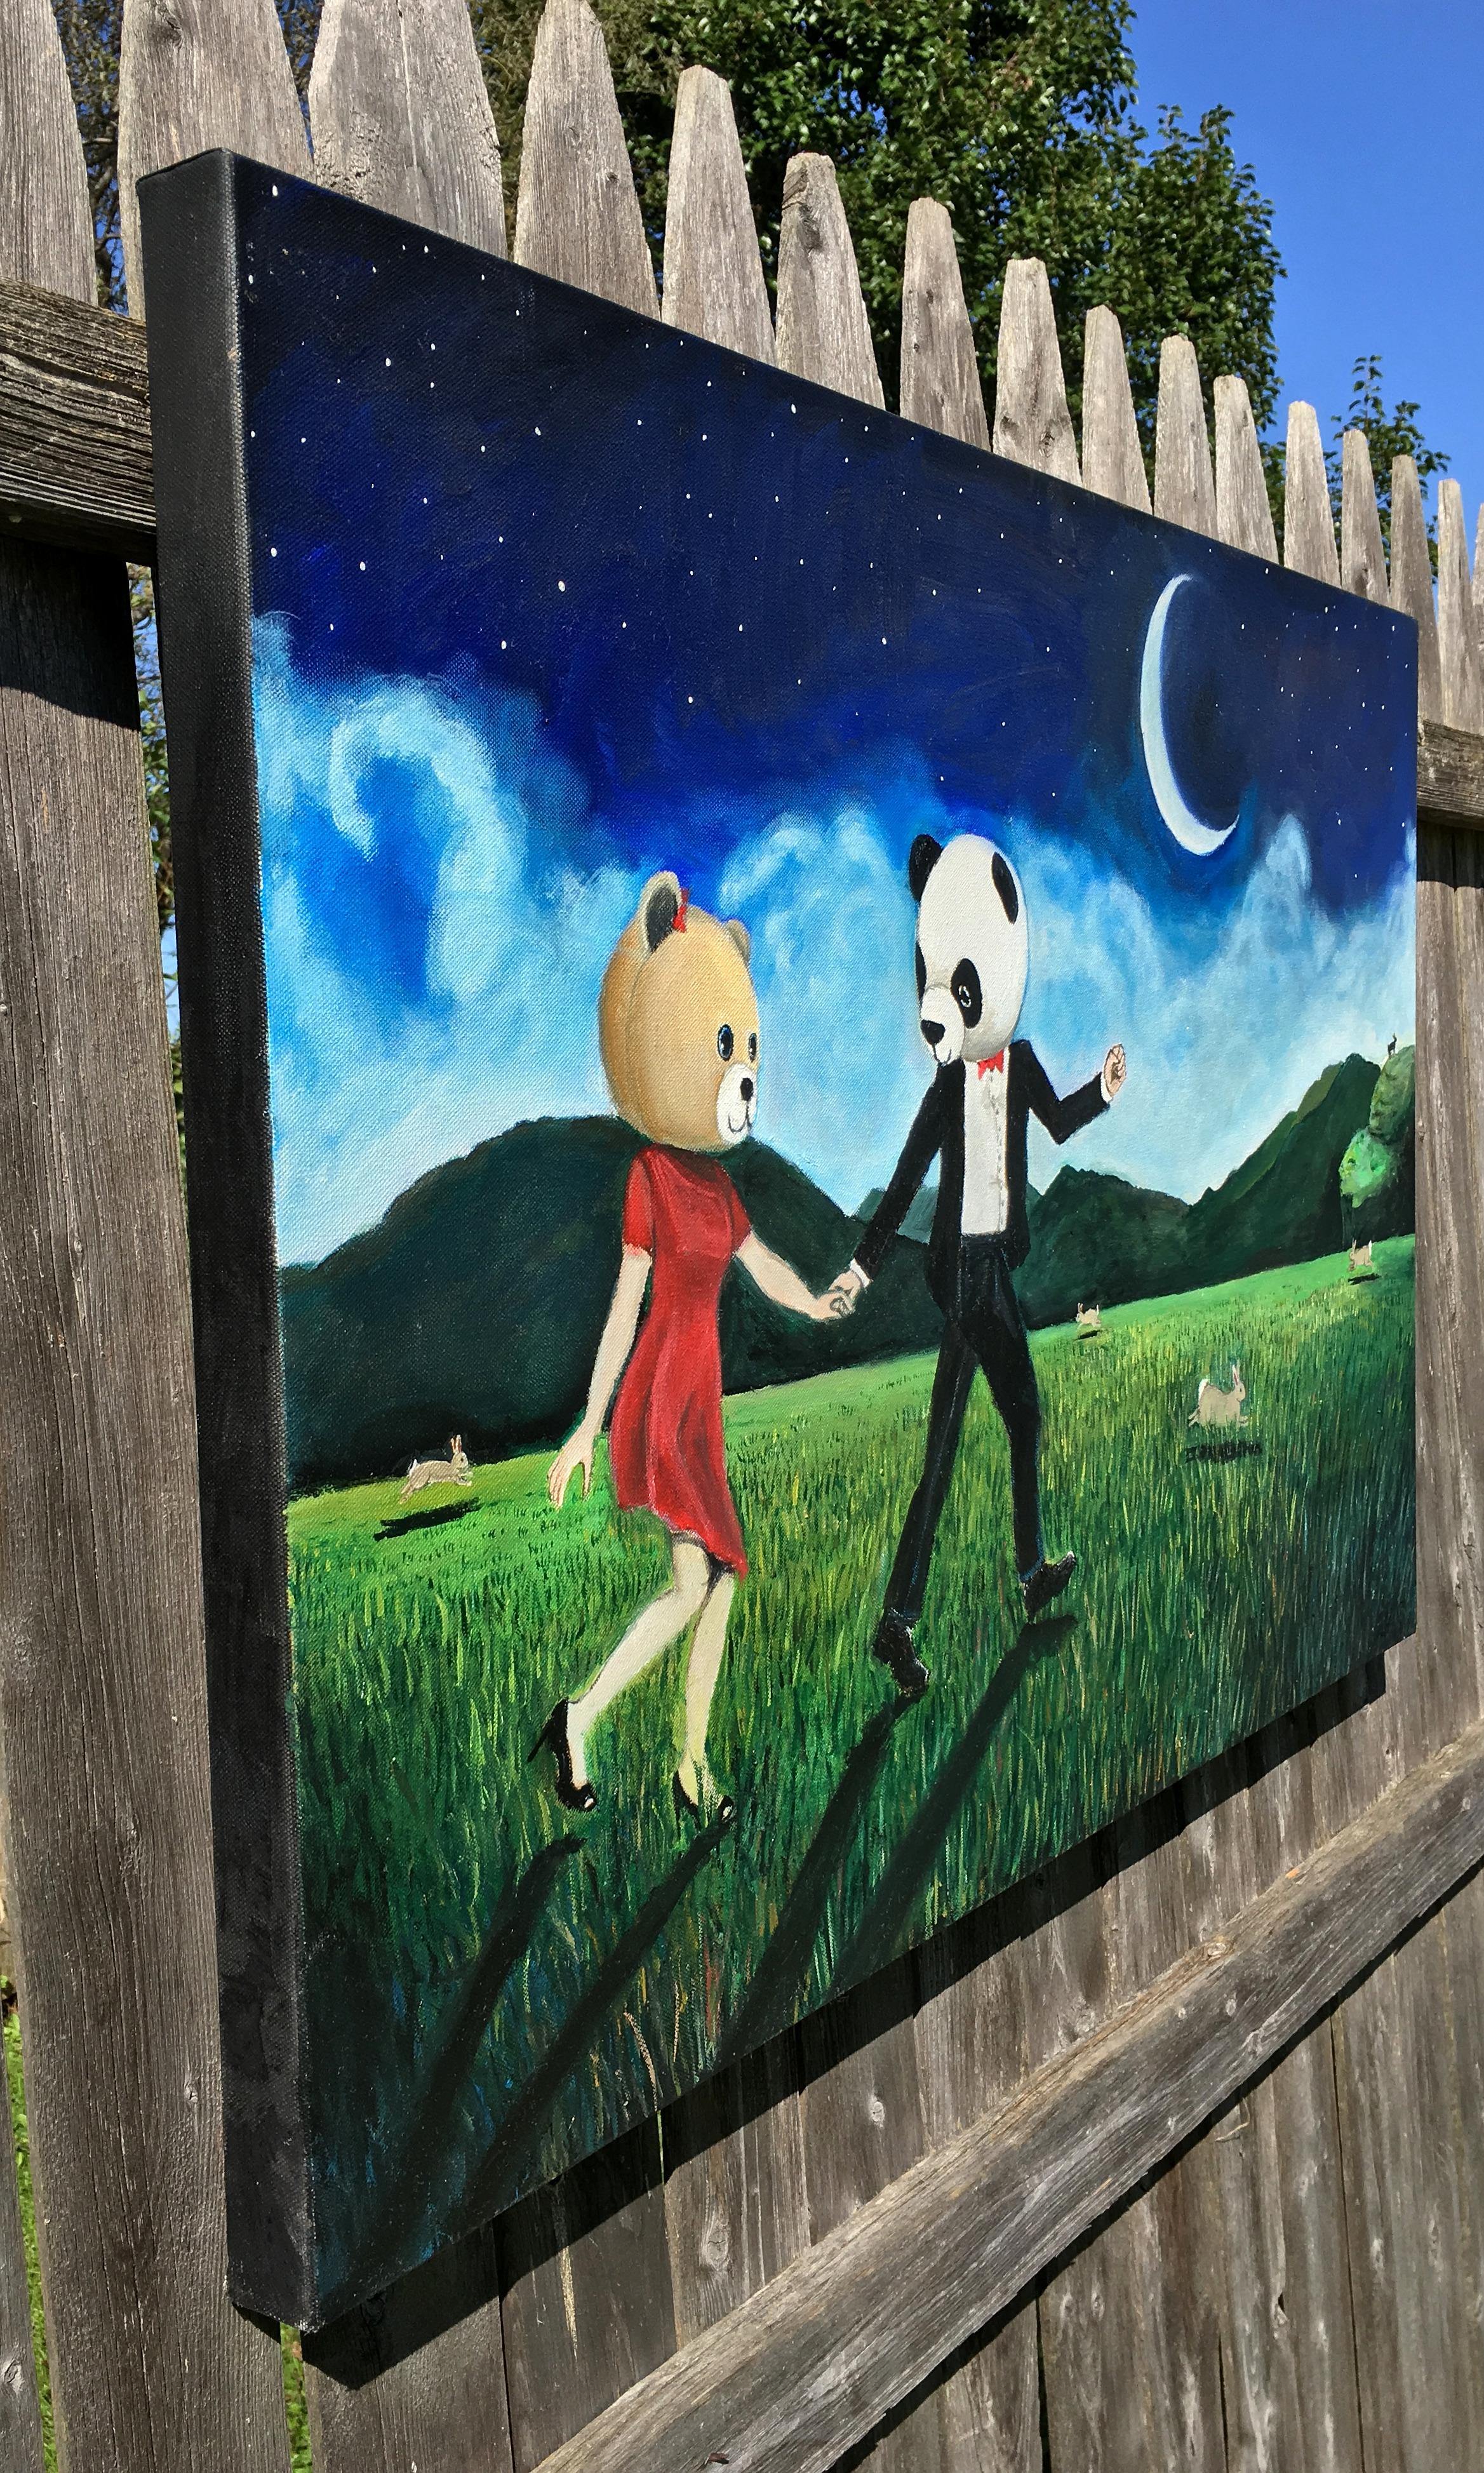 Frolicking by Moonlight - Painting by Kat Silver